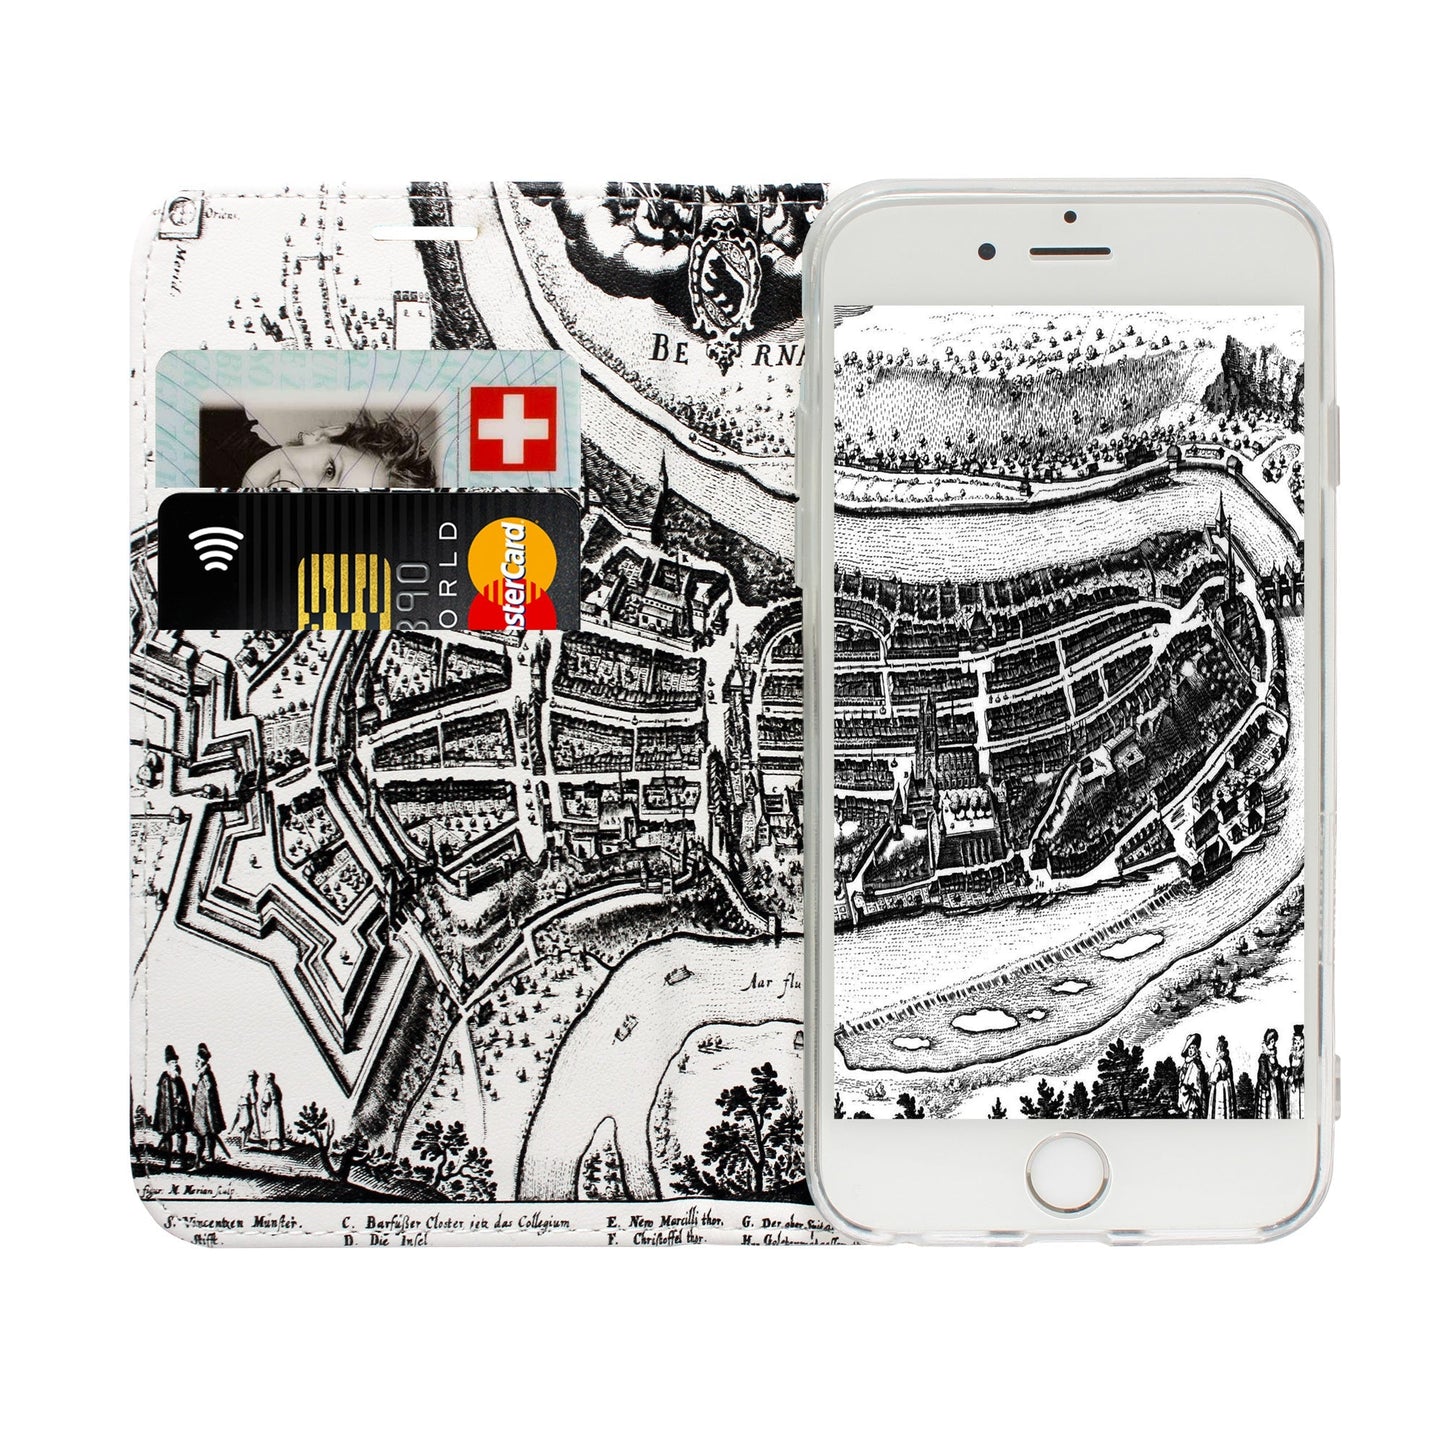 Bern City Panorama Case for iPhone 5/5S/SE 1